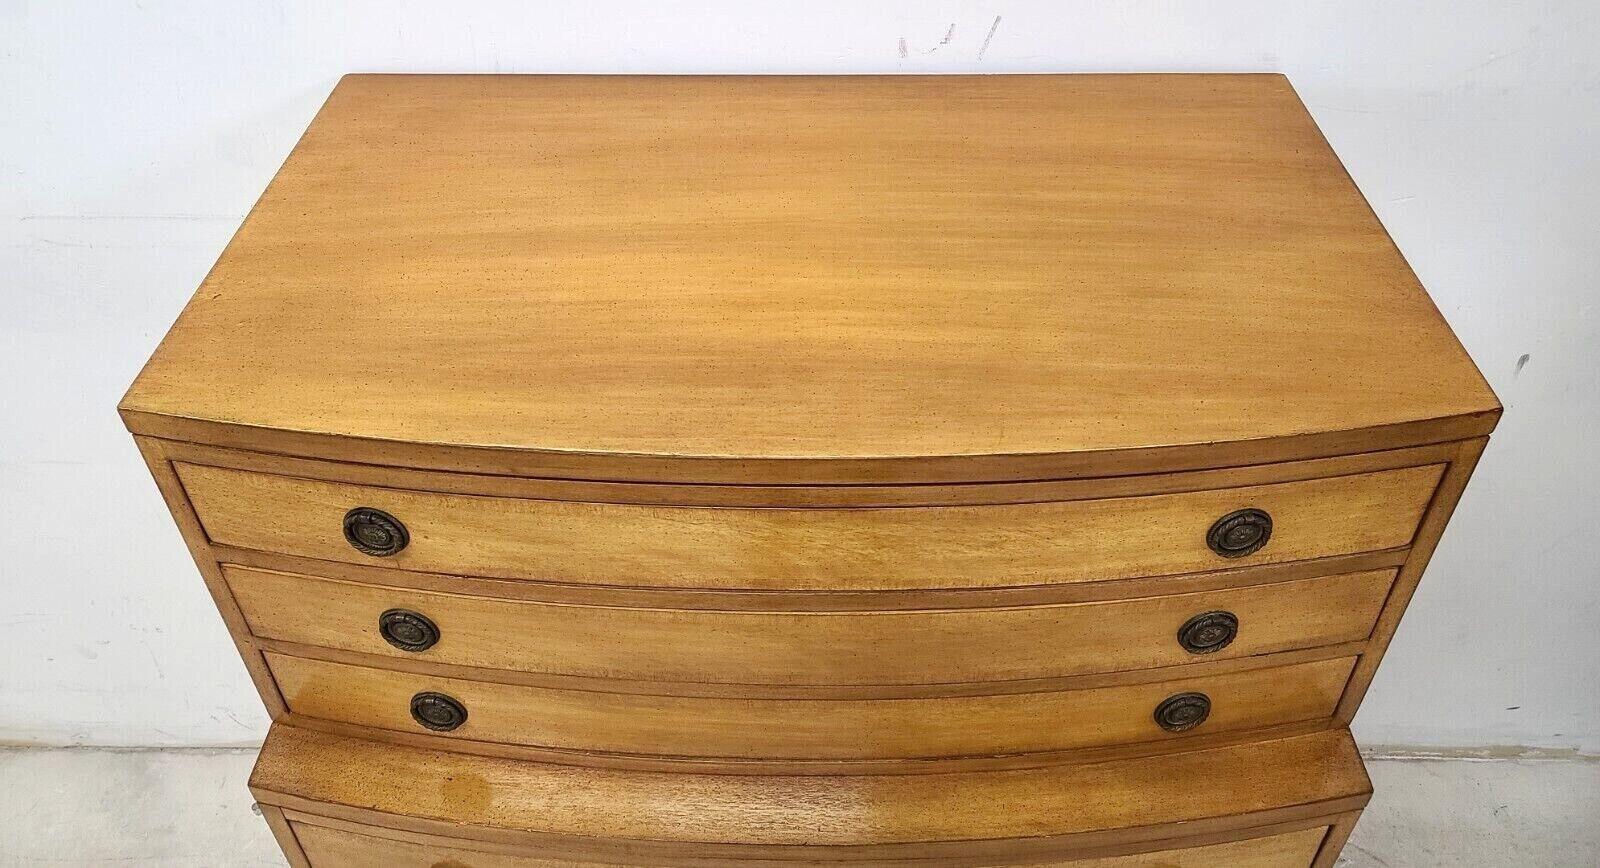 Offering one of our Recent Palm Beach Estate Fine Furniture Acquisitions Of A Vintage Mid Century Modern Mahogany Highboy Dresser by SLIGH
This listing and price are for dresser only. We also have including a pair of the matching nightstands listed